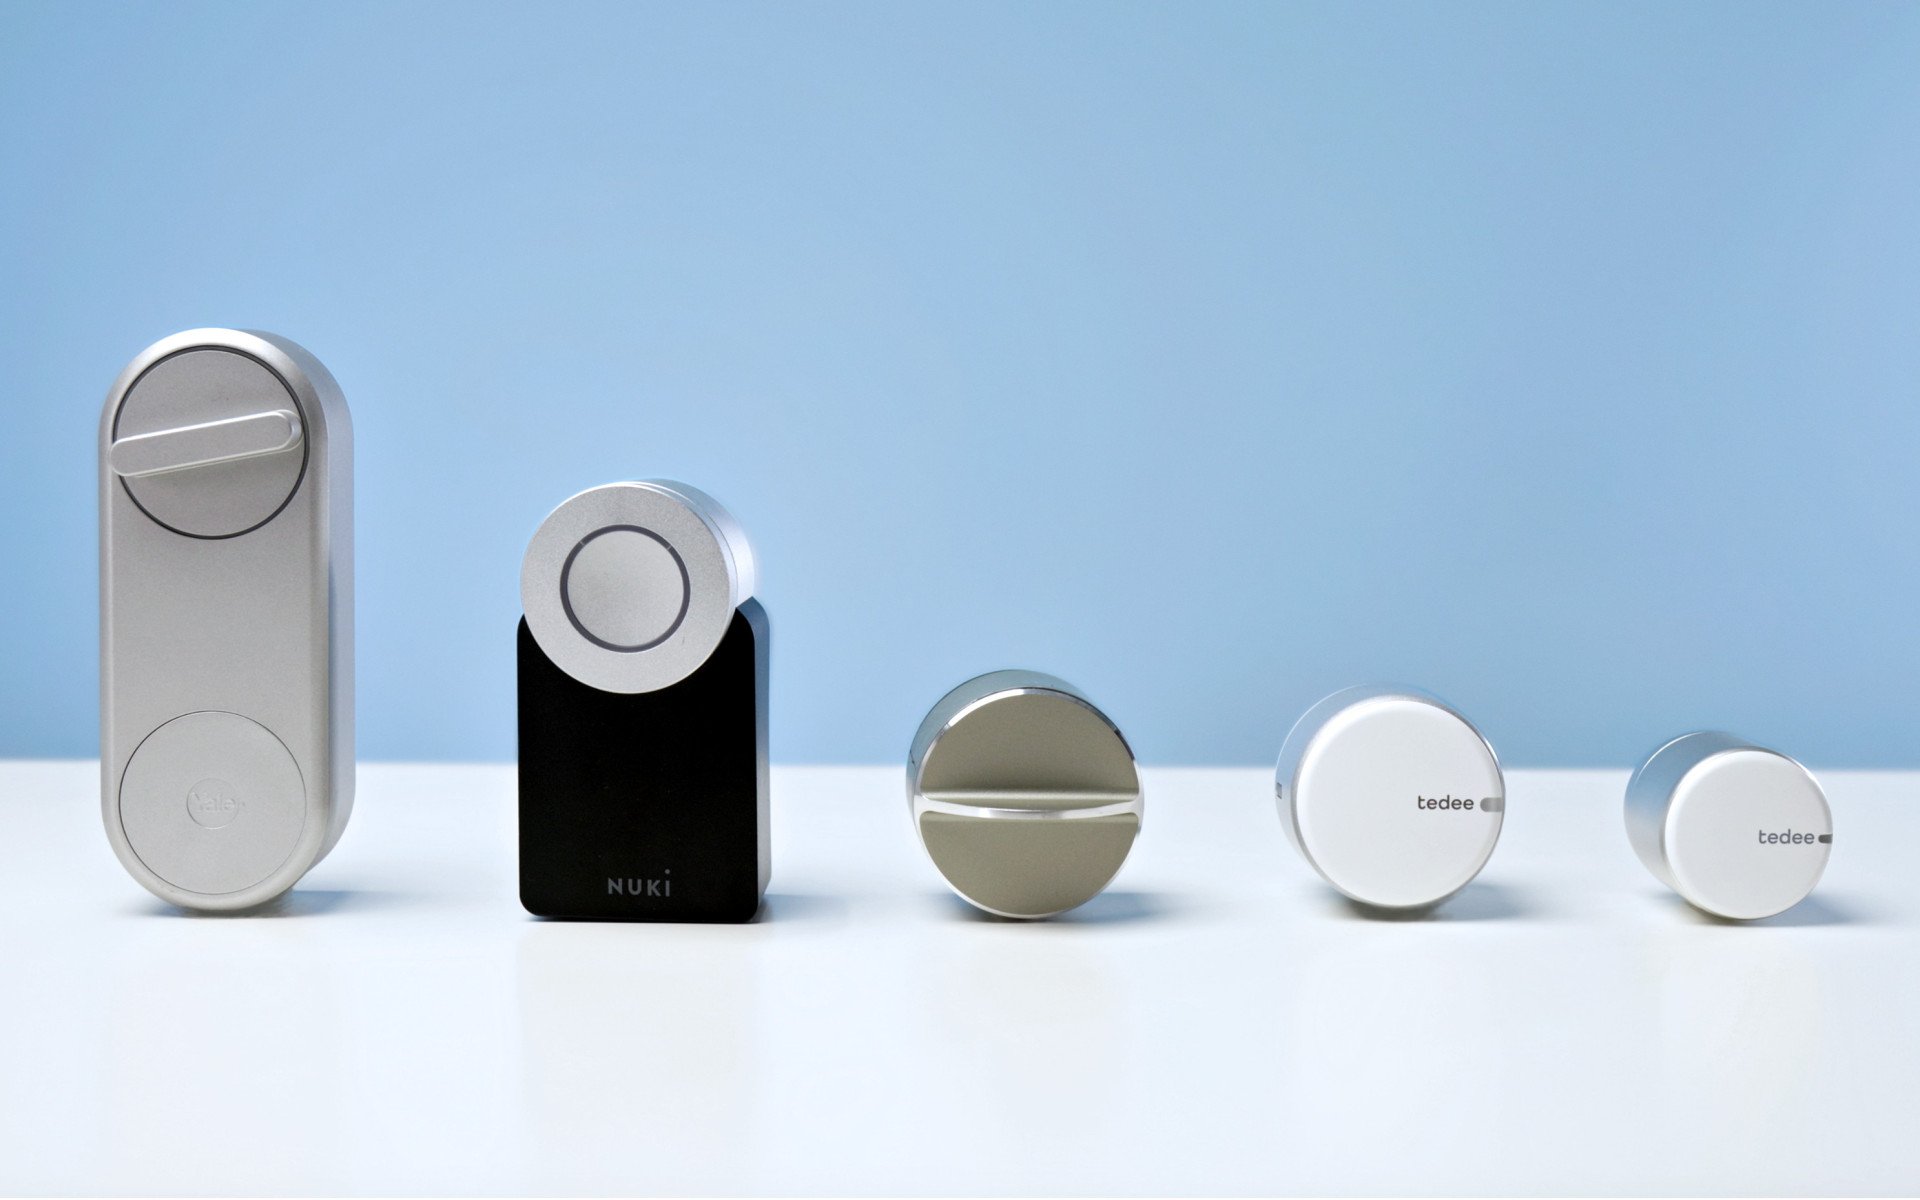 Tedee Go is a cheaper smart lock with Thread support – Homecinema Magazine